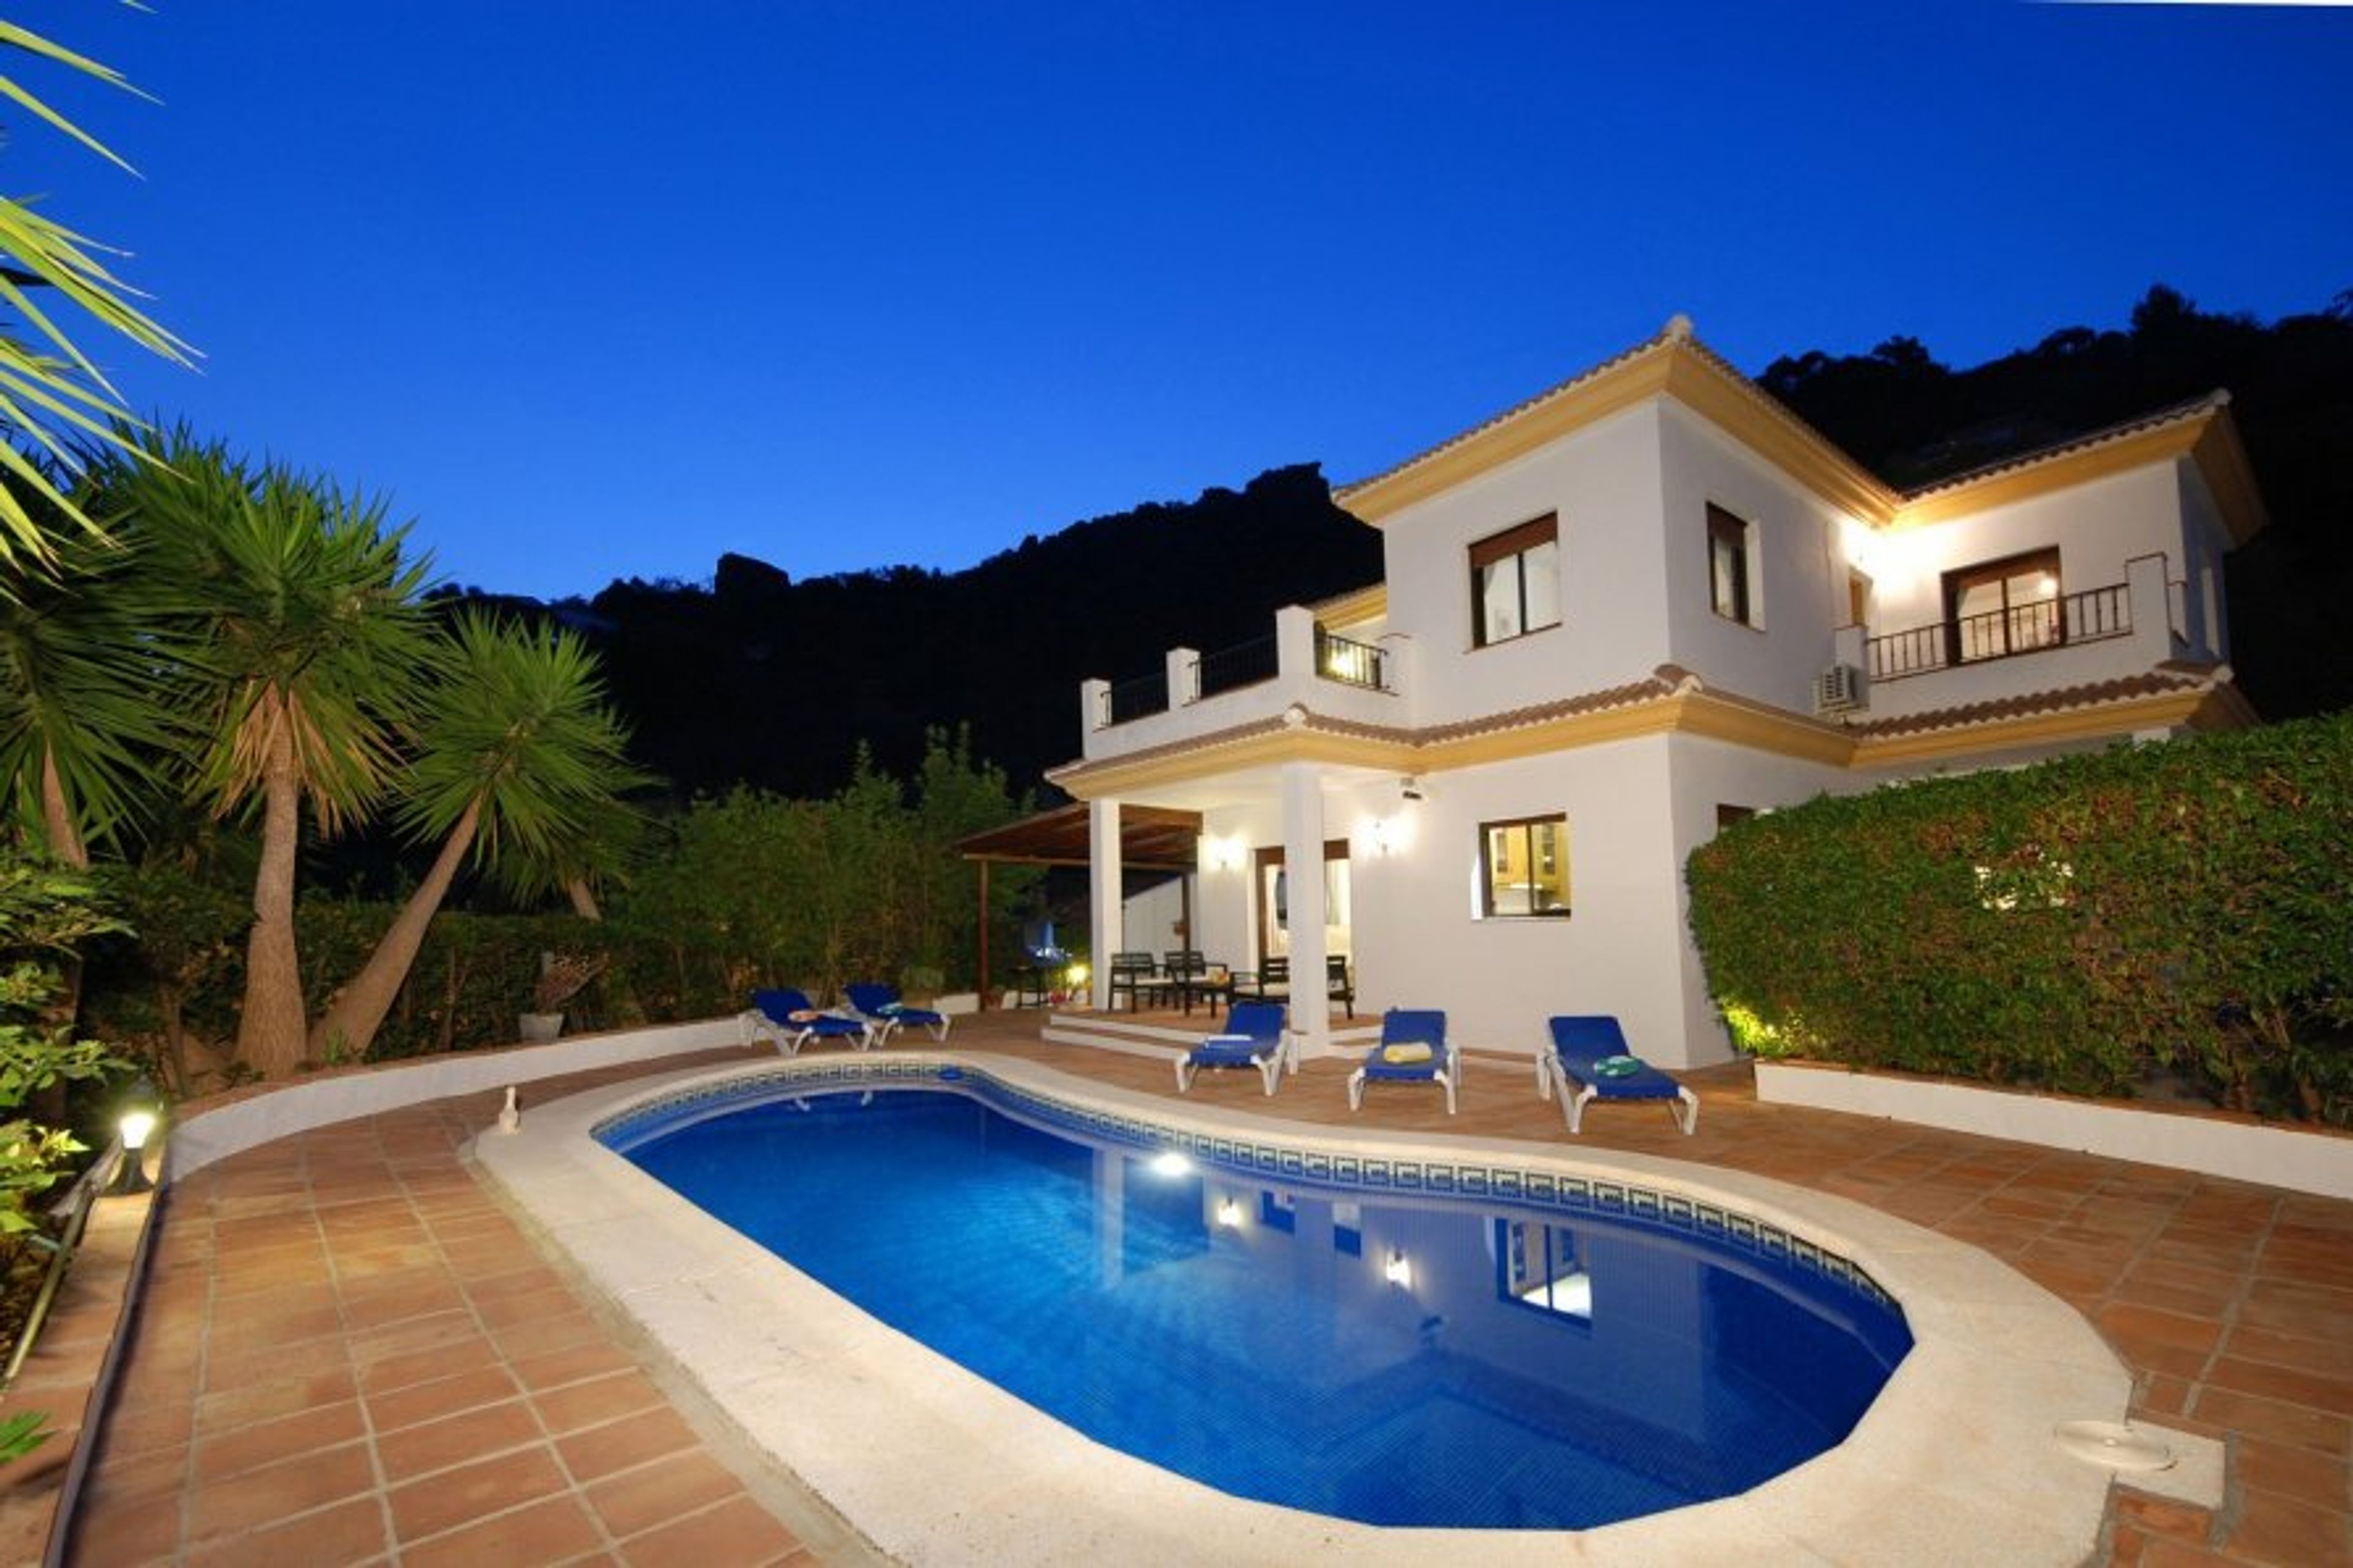 Enjoy heating for the swimming pool even at night!